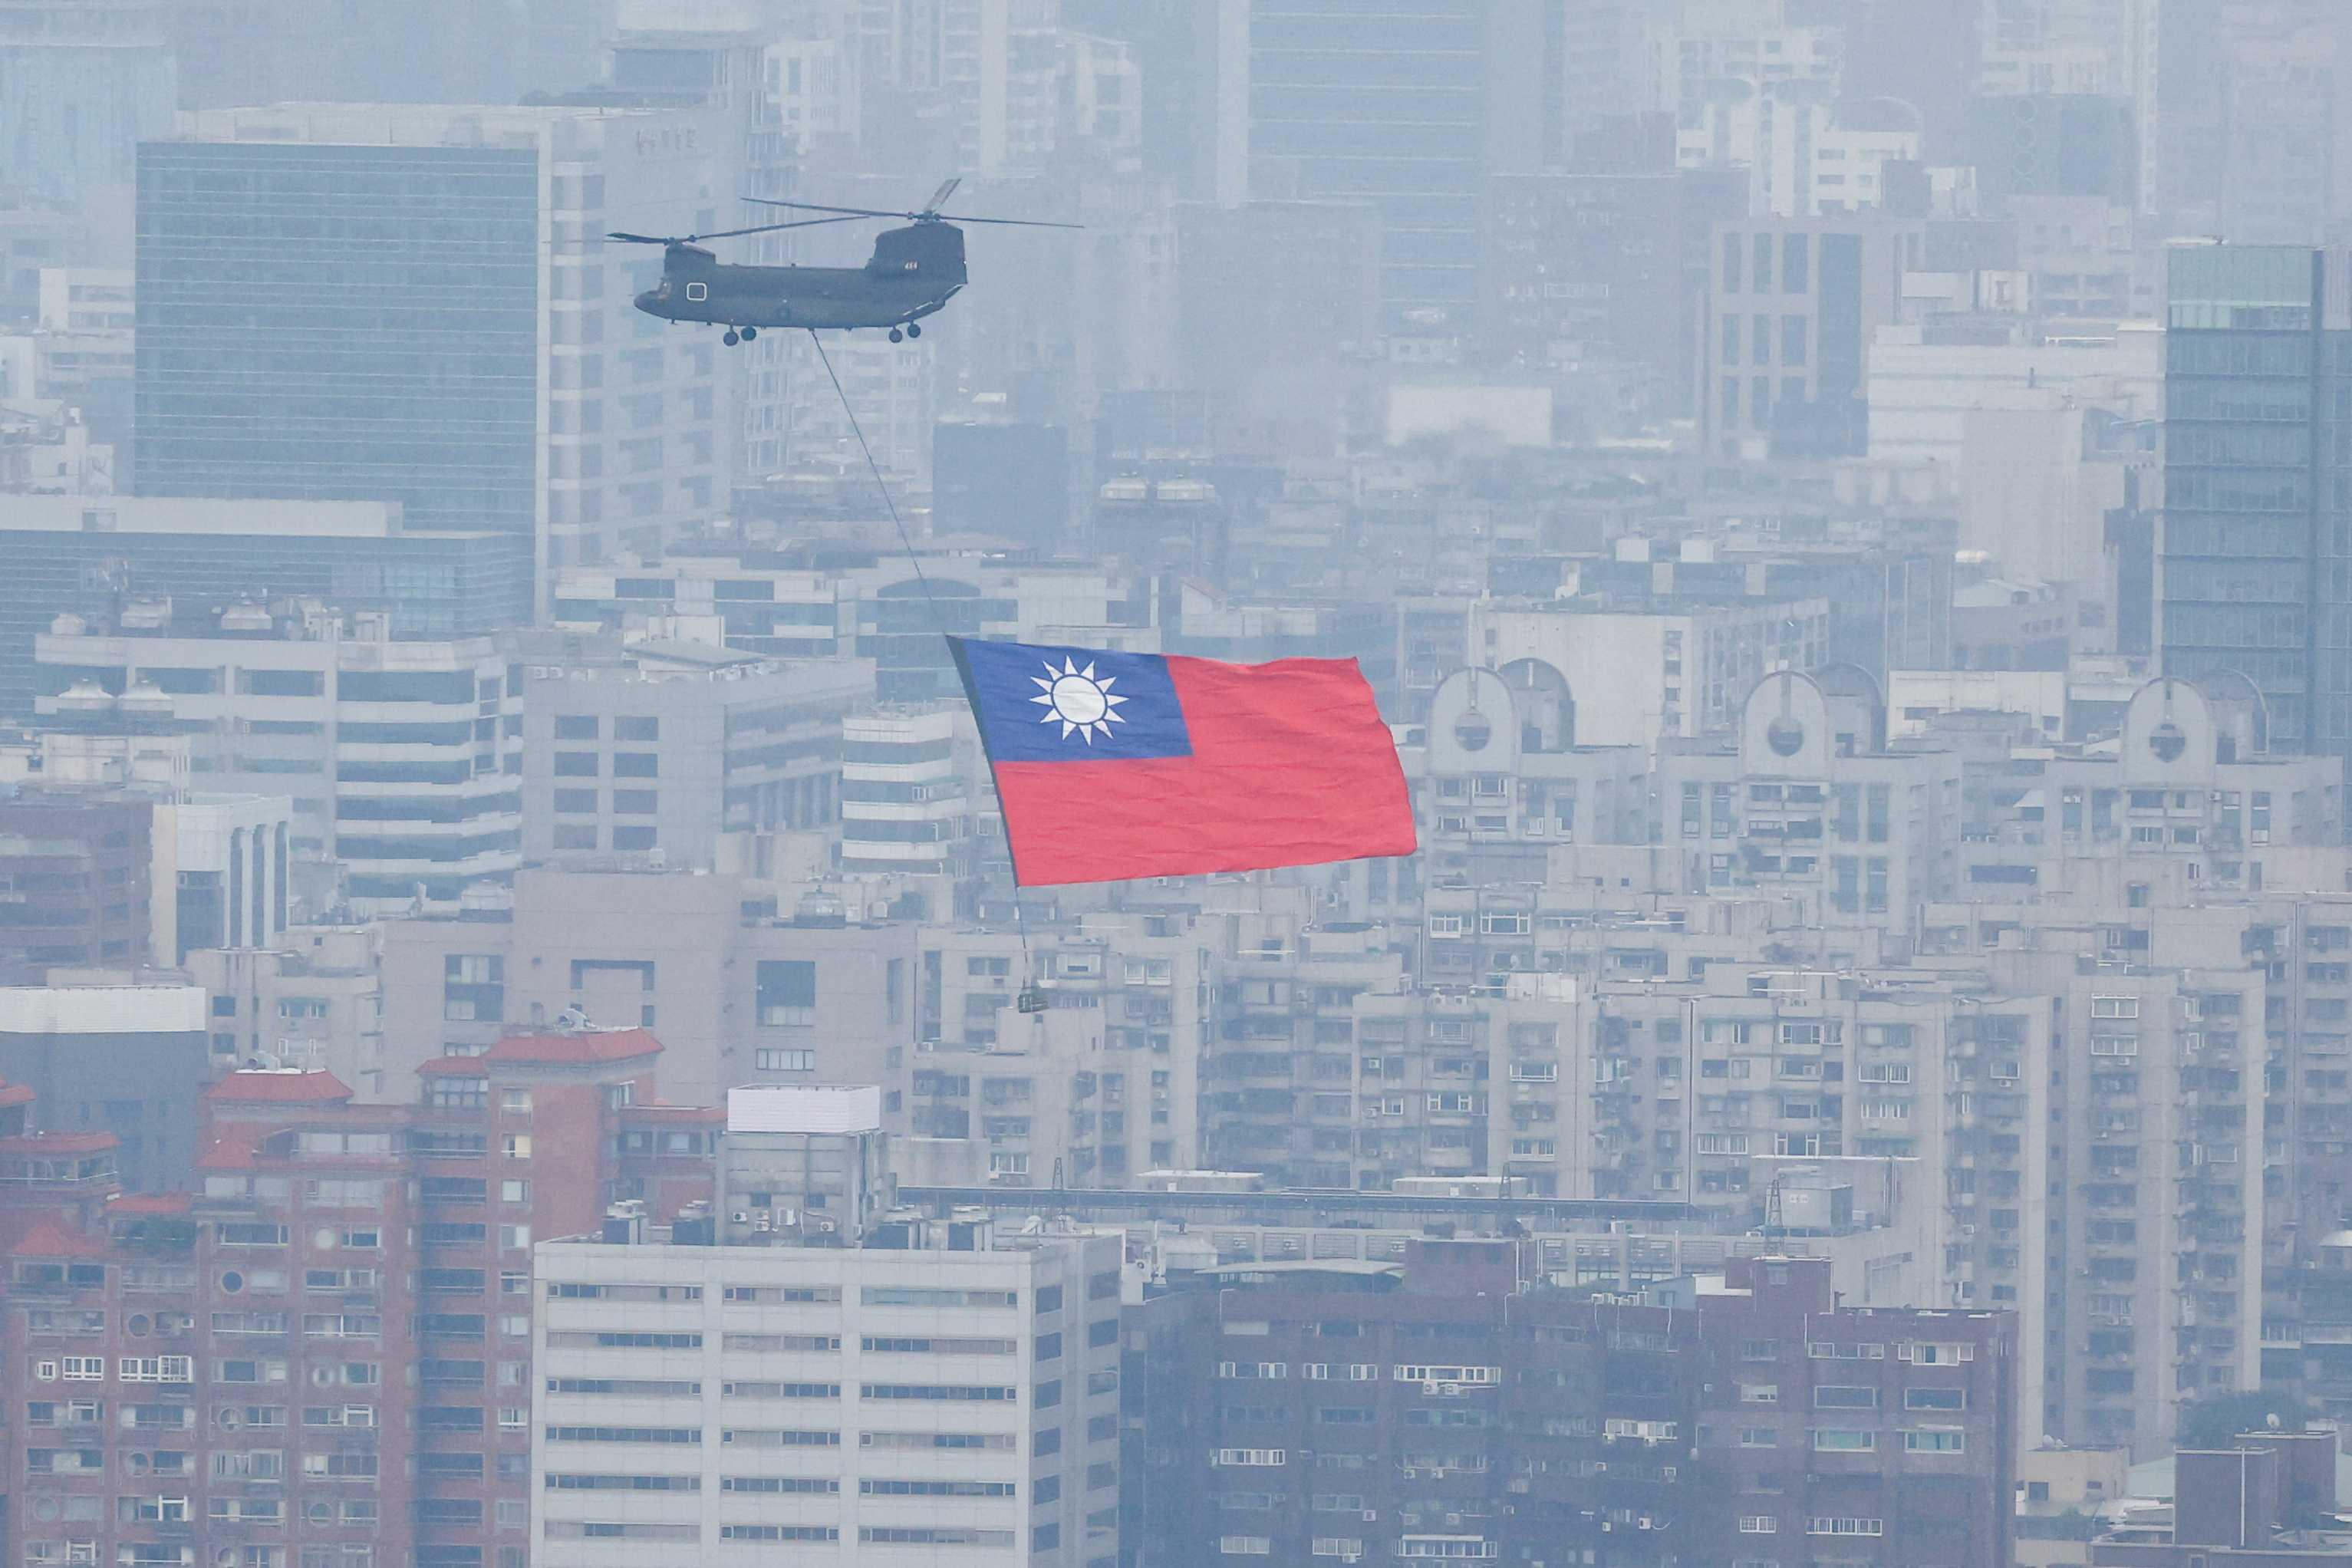 A Chinook helicopter carrying a Taiwan flag flies over the city during the country's National Day celebration in Taipei, Taiwan Oct 10. Photo: Reuters